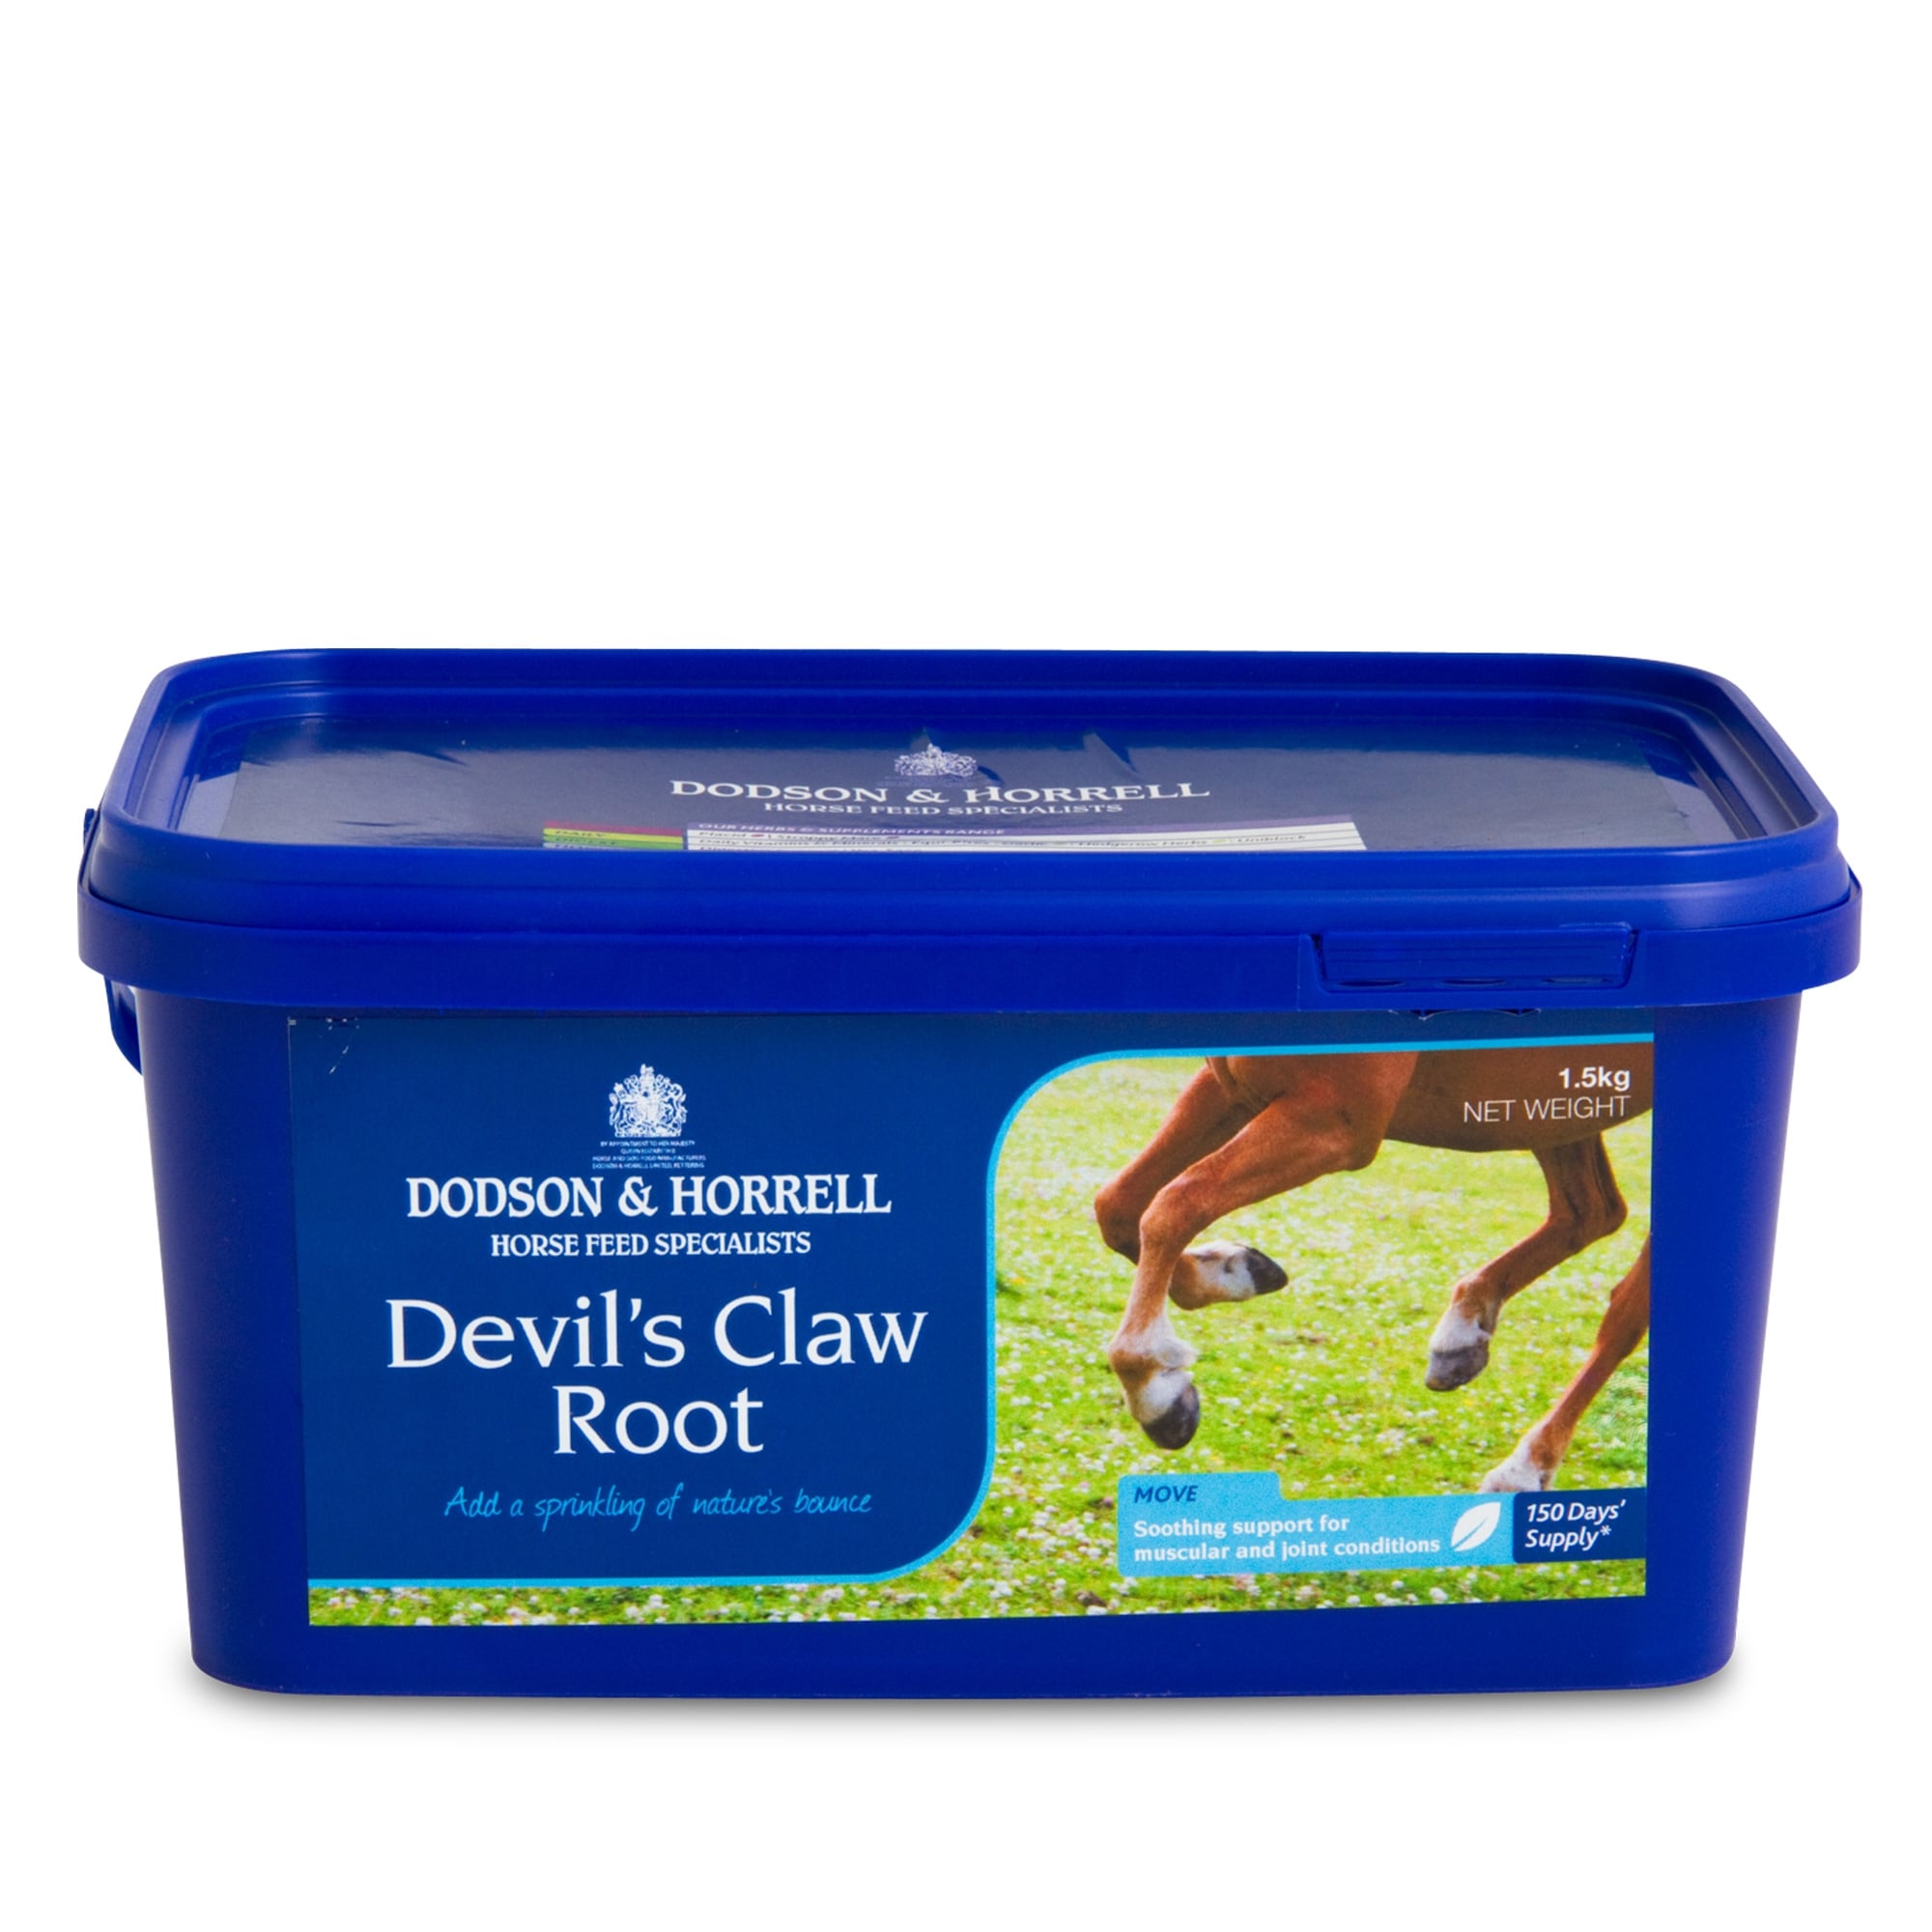 Dodson & Horrell Devil's Claw Root 